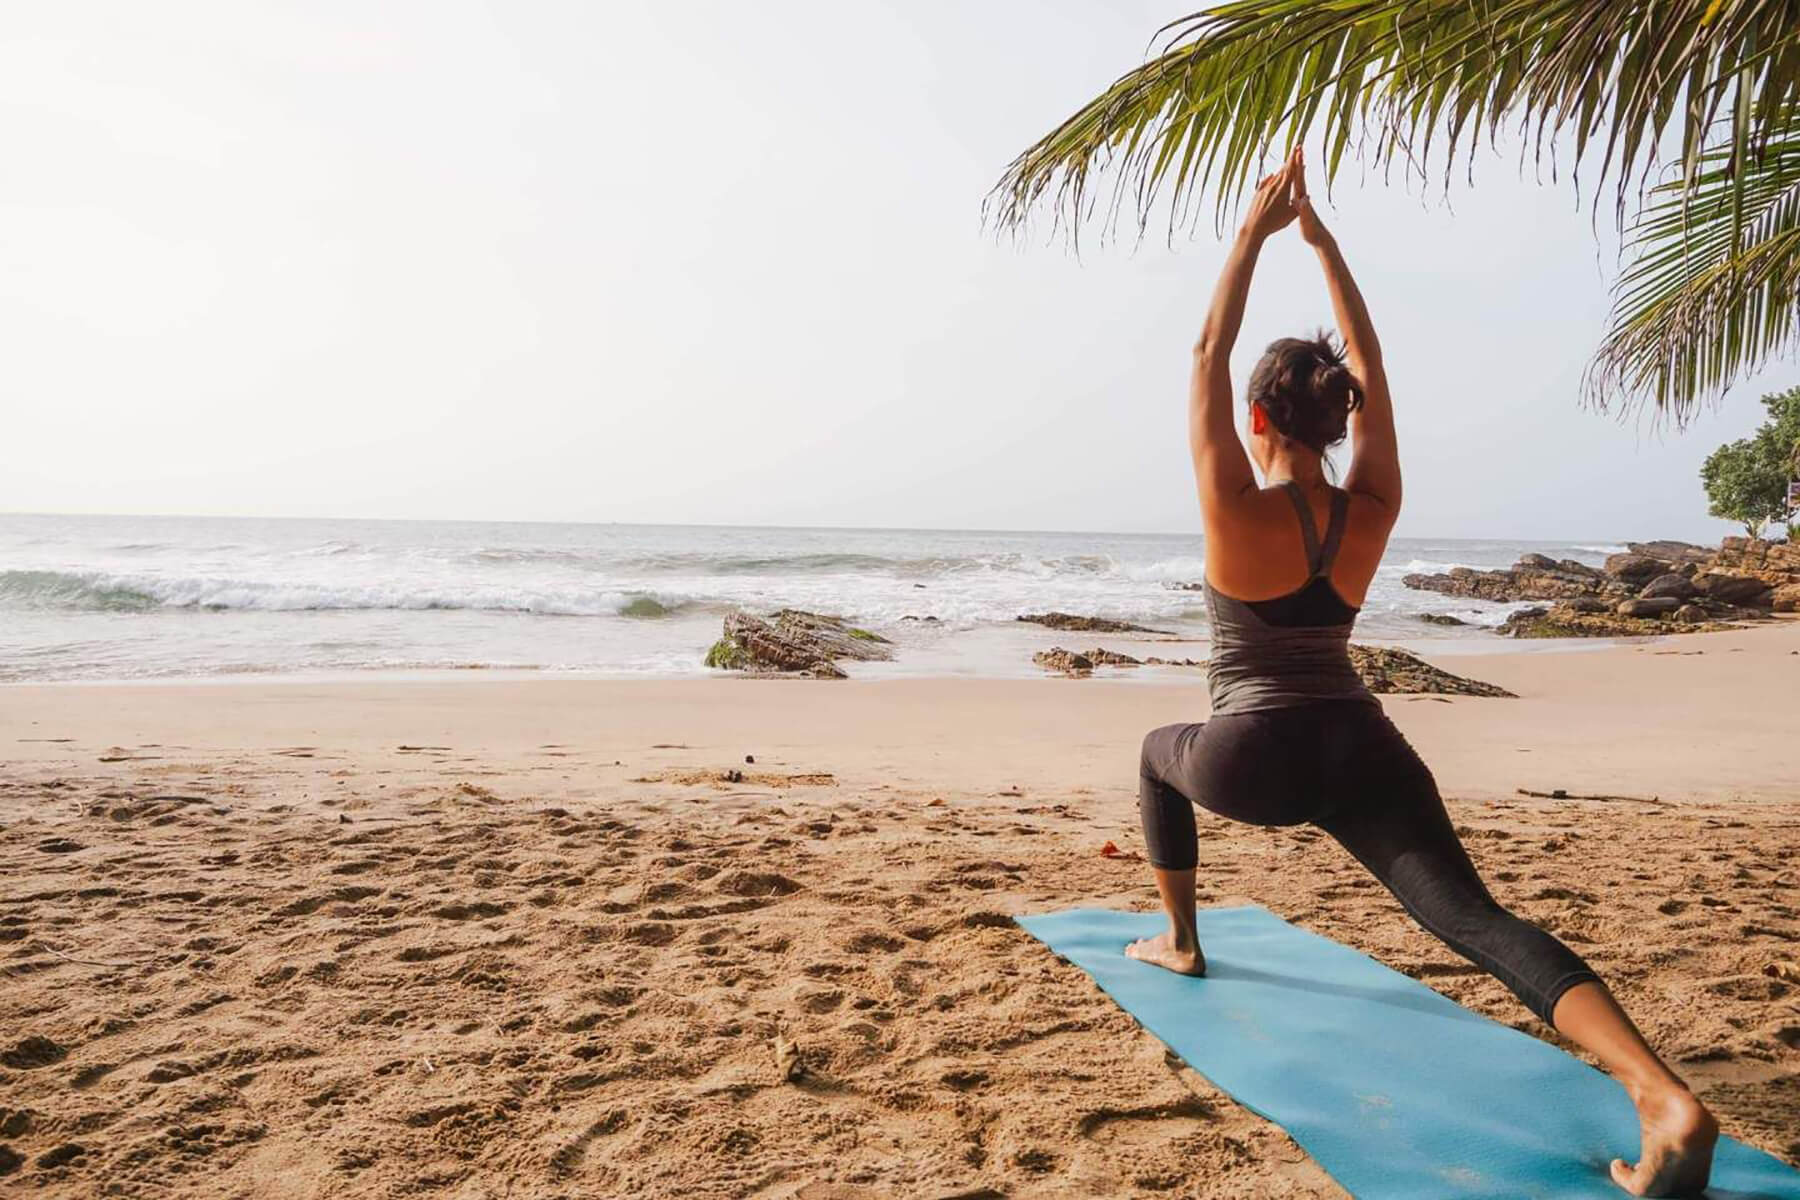 Discover meditation and yoga in Sri Lanka with Blue Lanka Tours